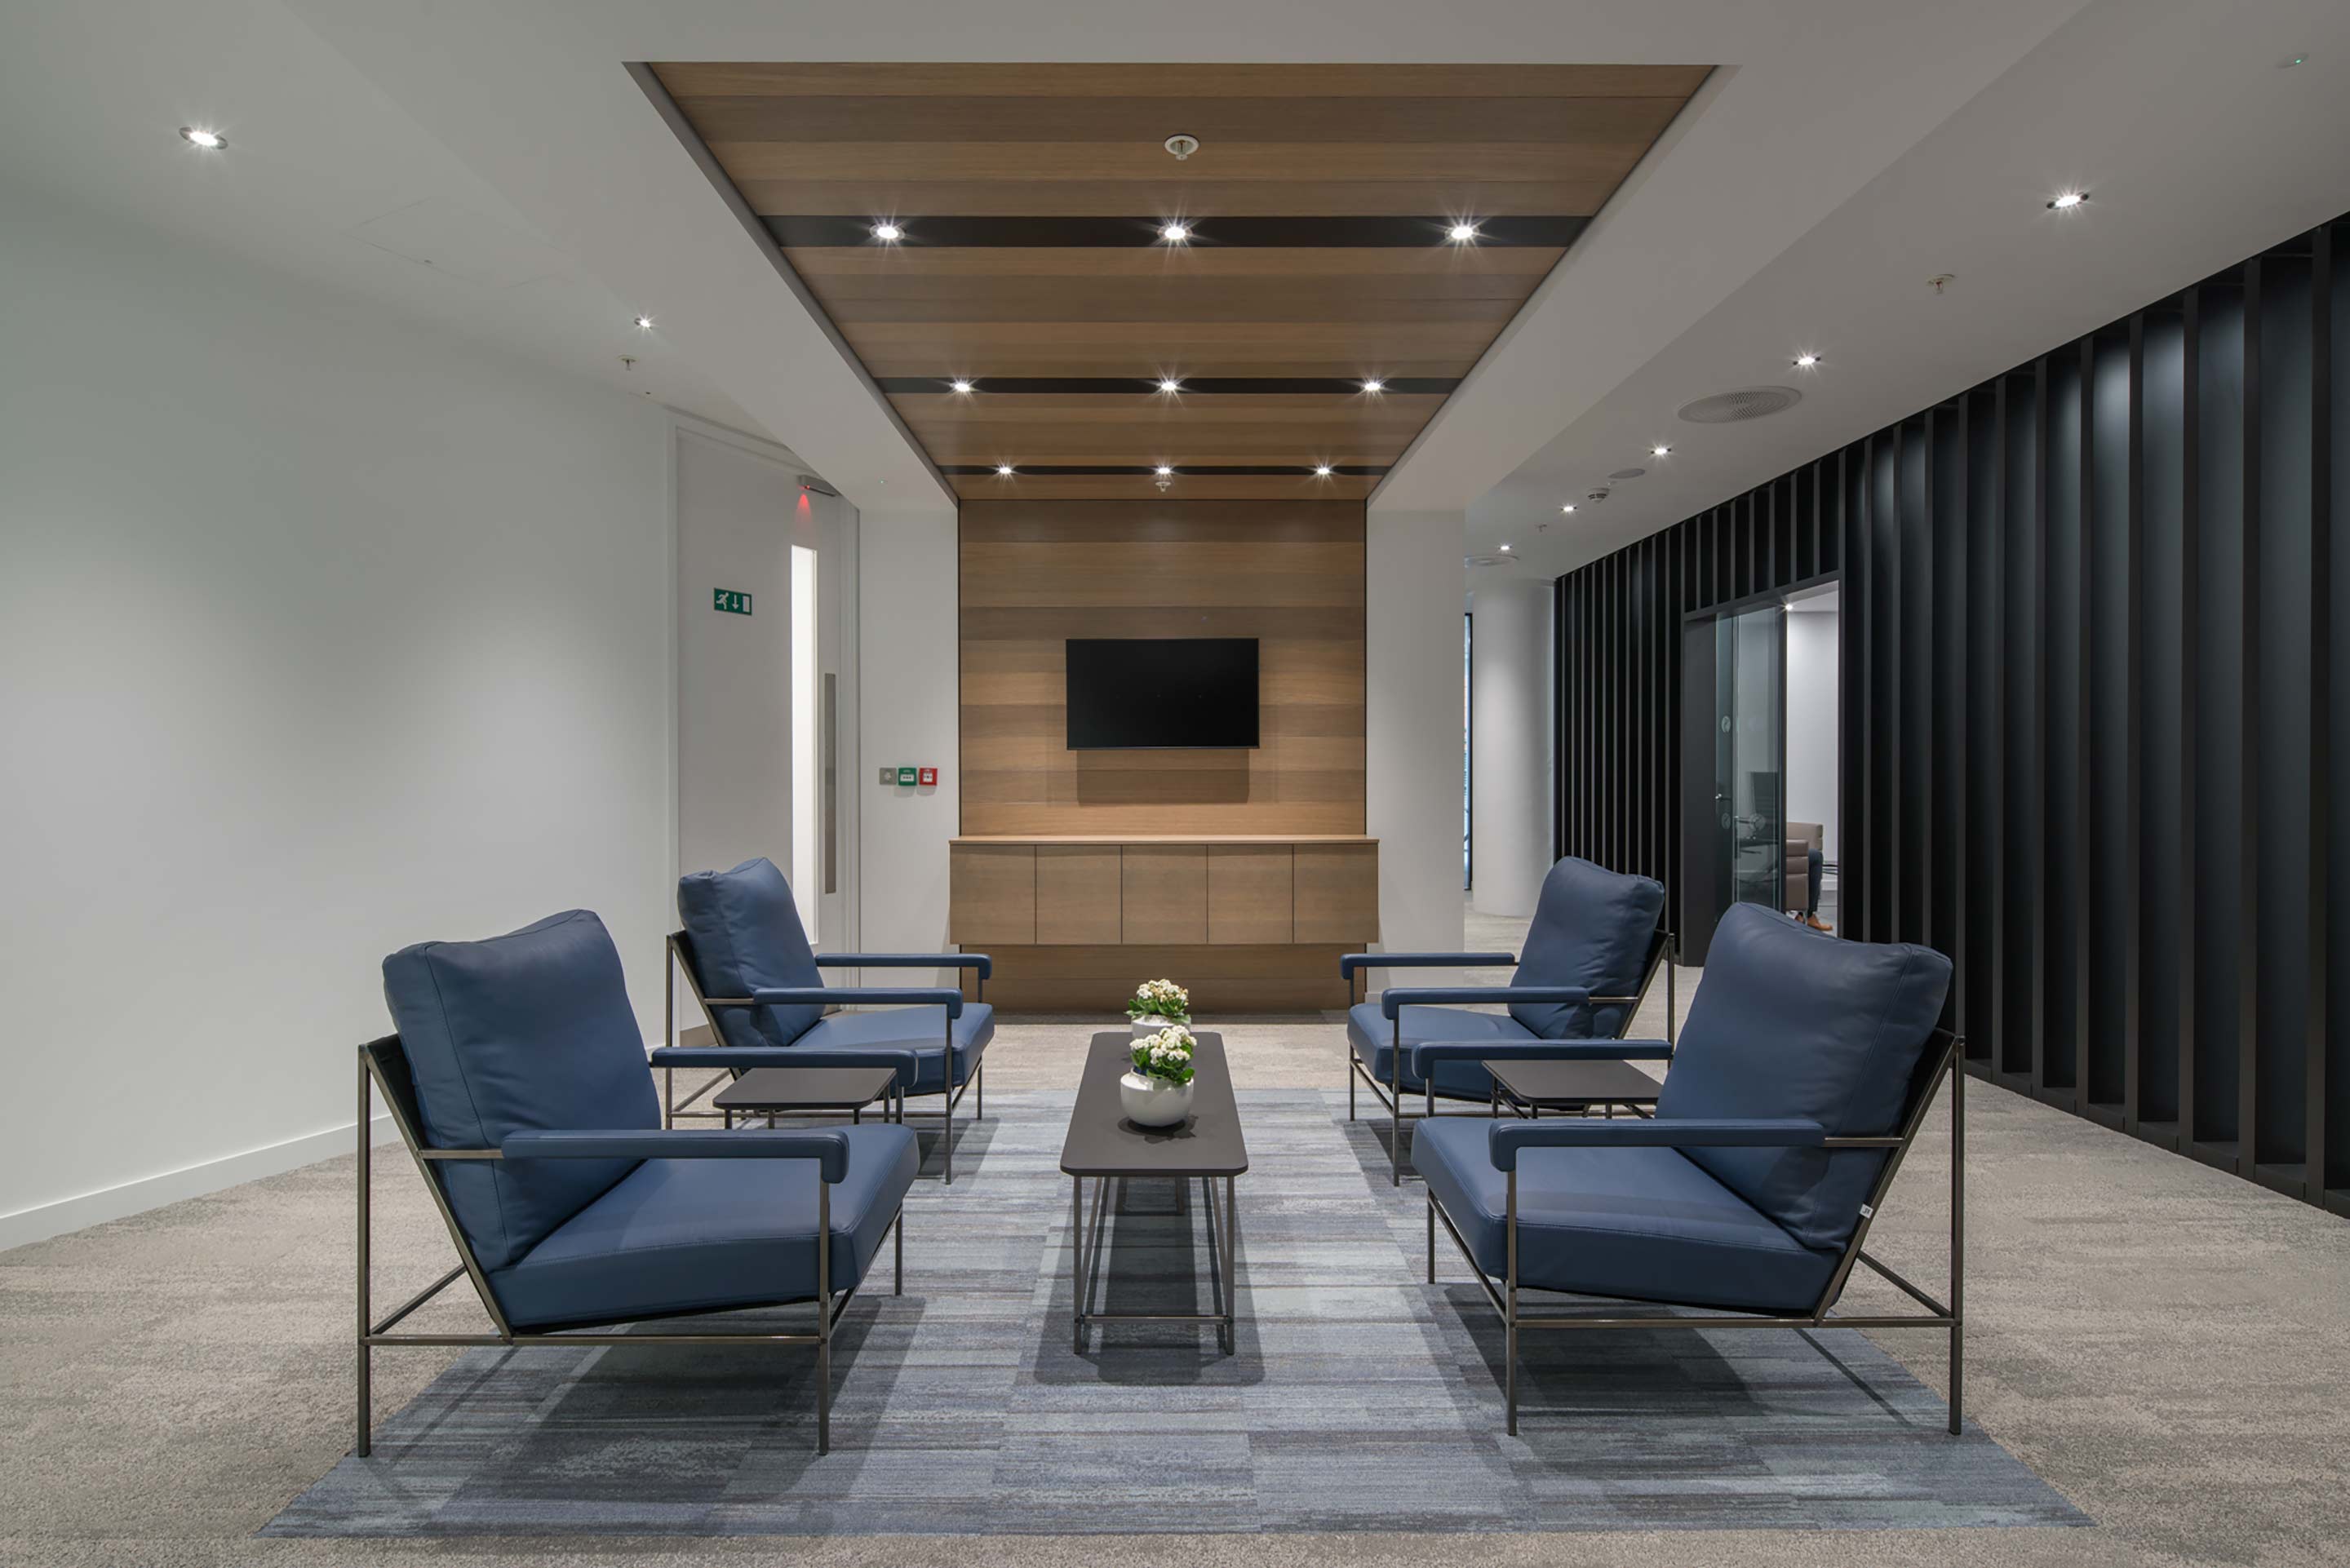 Seating and waiting area at Marlin Equity Partners